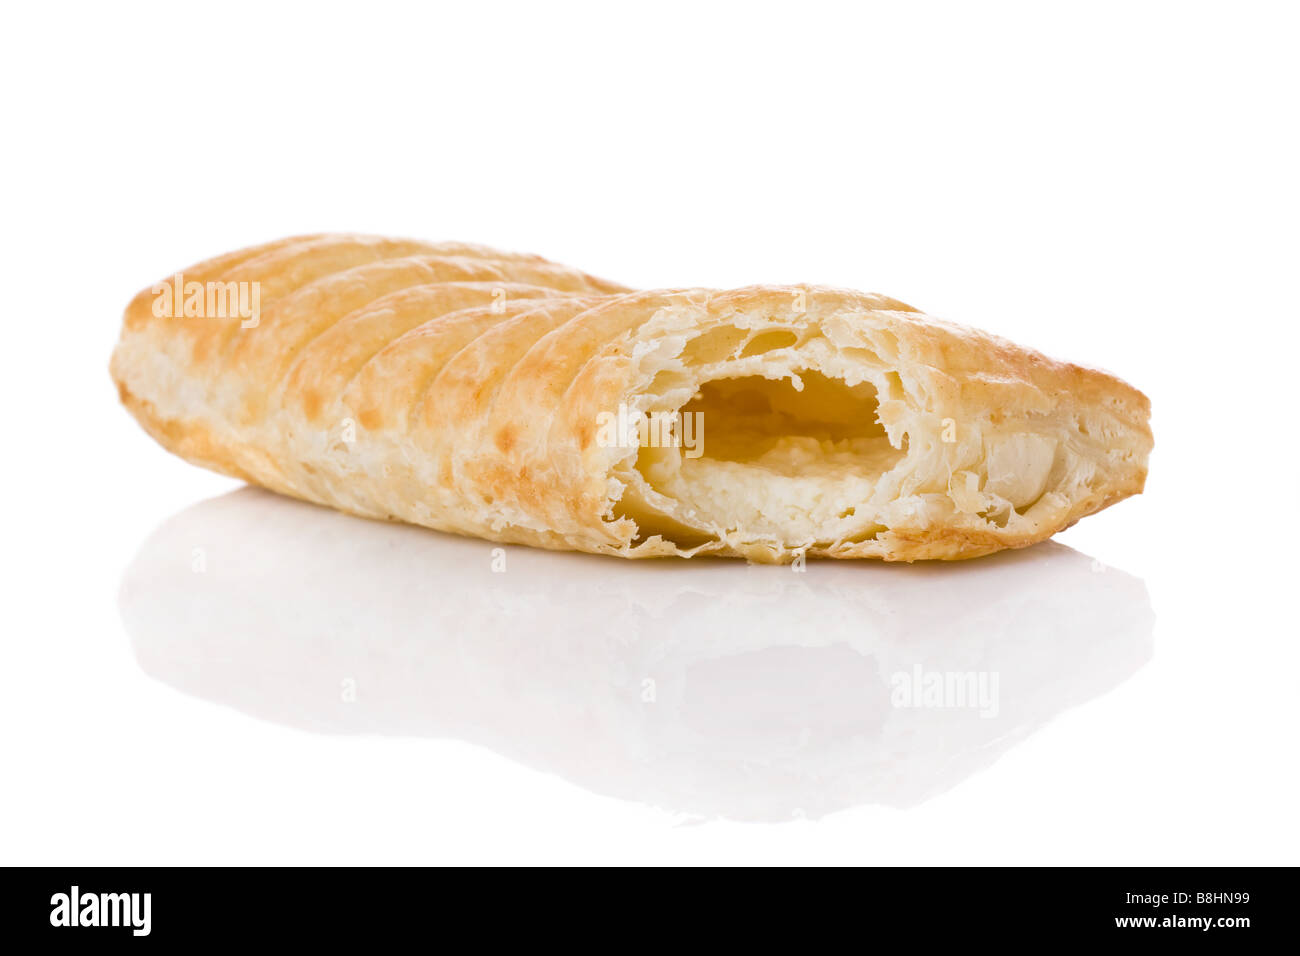 Puff pastry stuffed with melted cheese isolated on white background Stock Photo